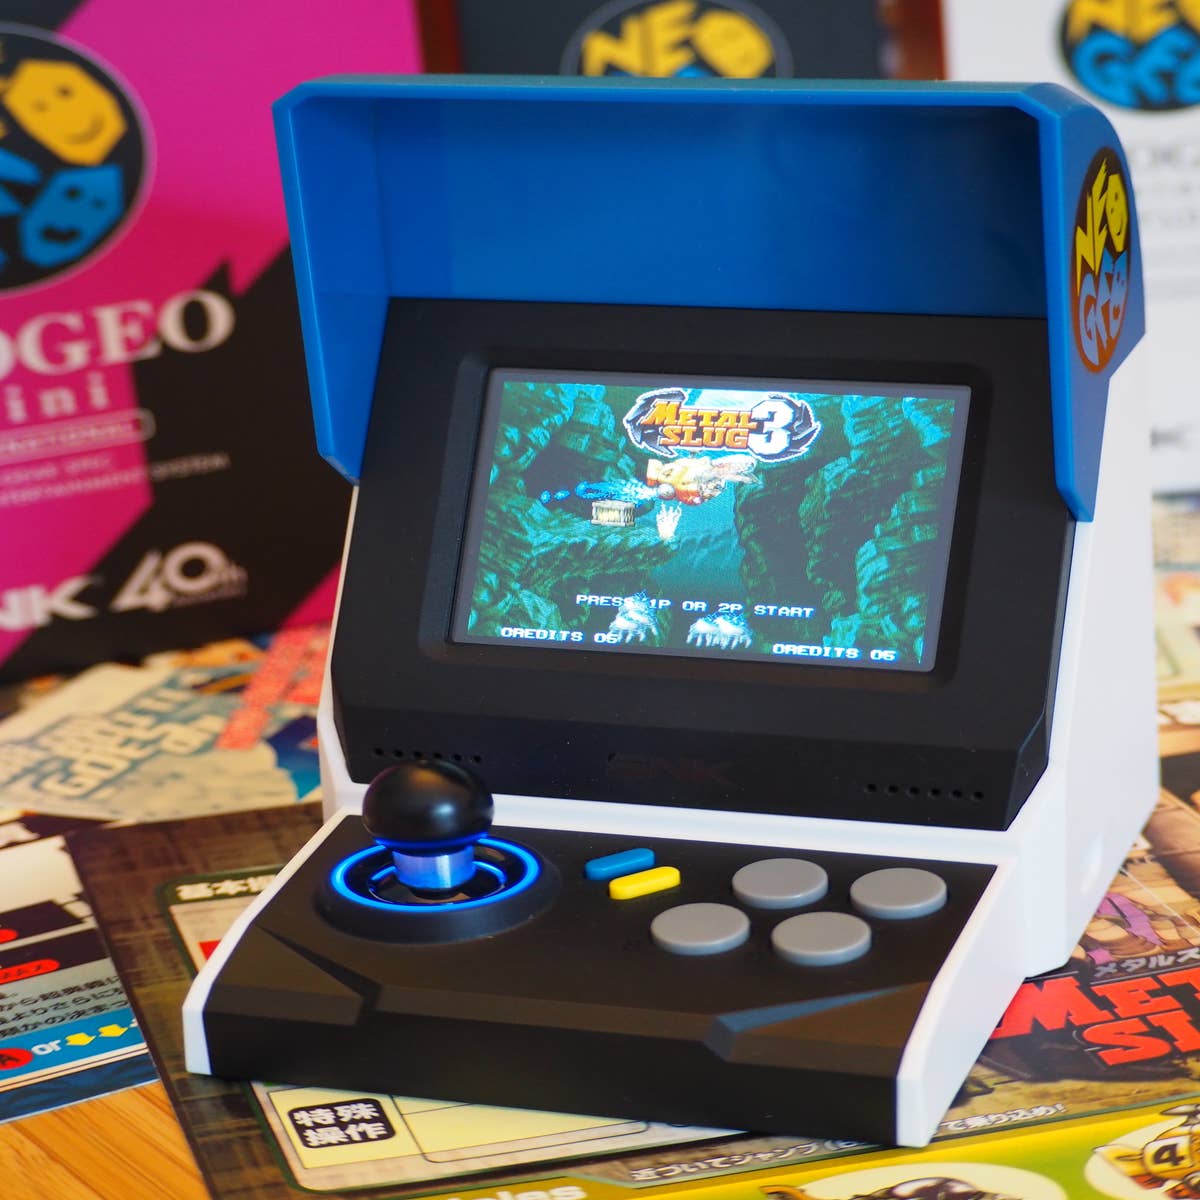 The Neo Geo Mini is an impressive but imperfect way to play SNK's